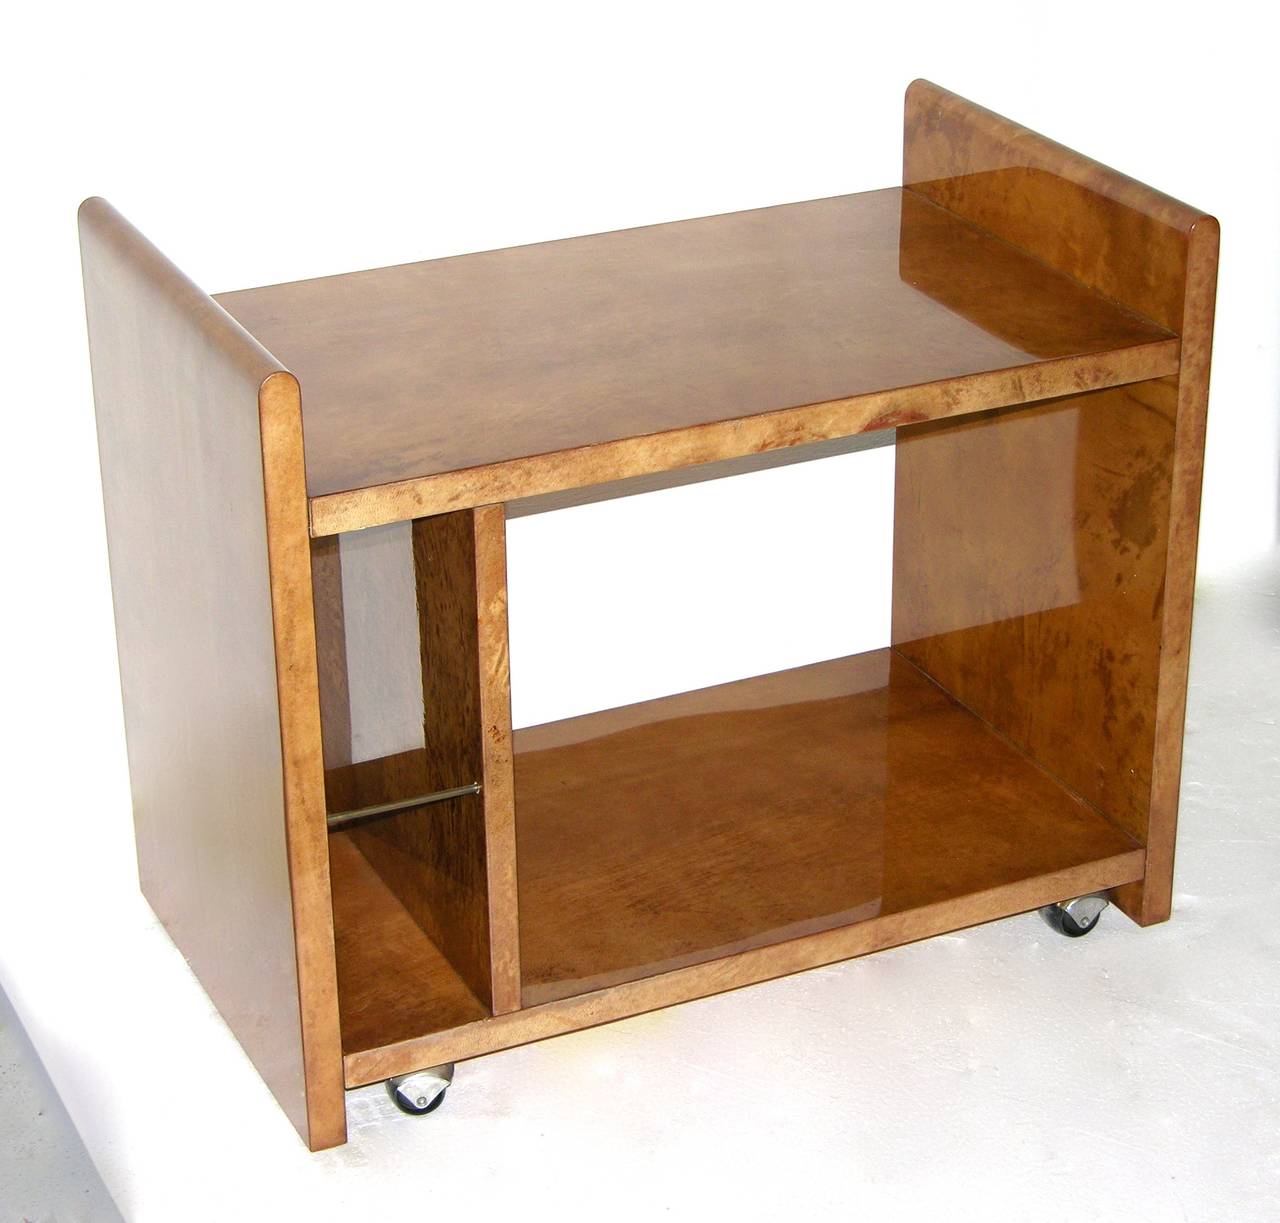 A rare piece by Aldo Tura, excellence in the construction and refinement, the structure in solid maple is elegantly covered in amber goatskin; the shape and wheels provide versatile use: a charming side table with display space, a serving table with